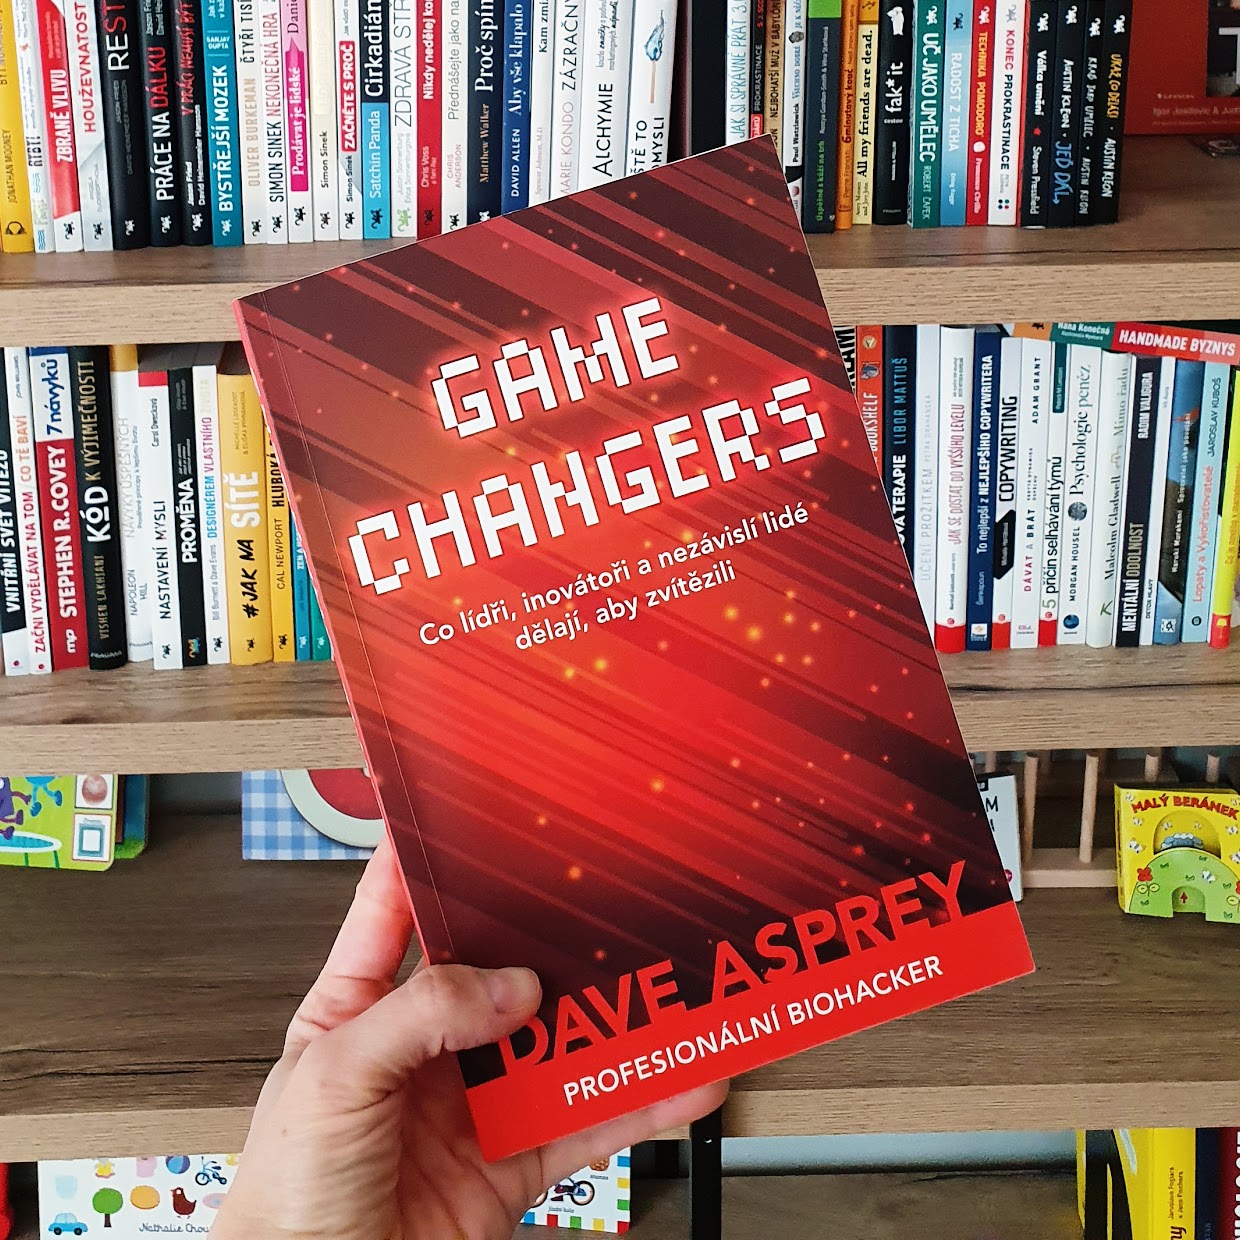 Game Changers (Game changers) - Dave Asprey